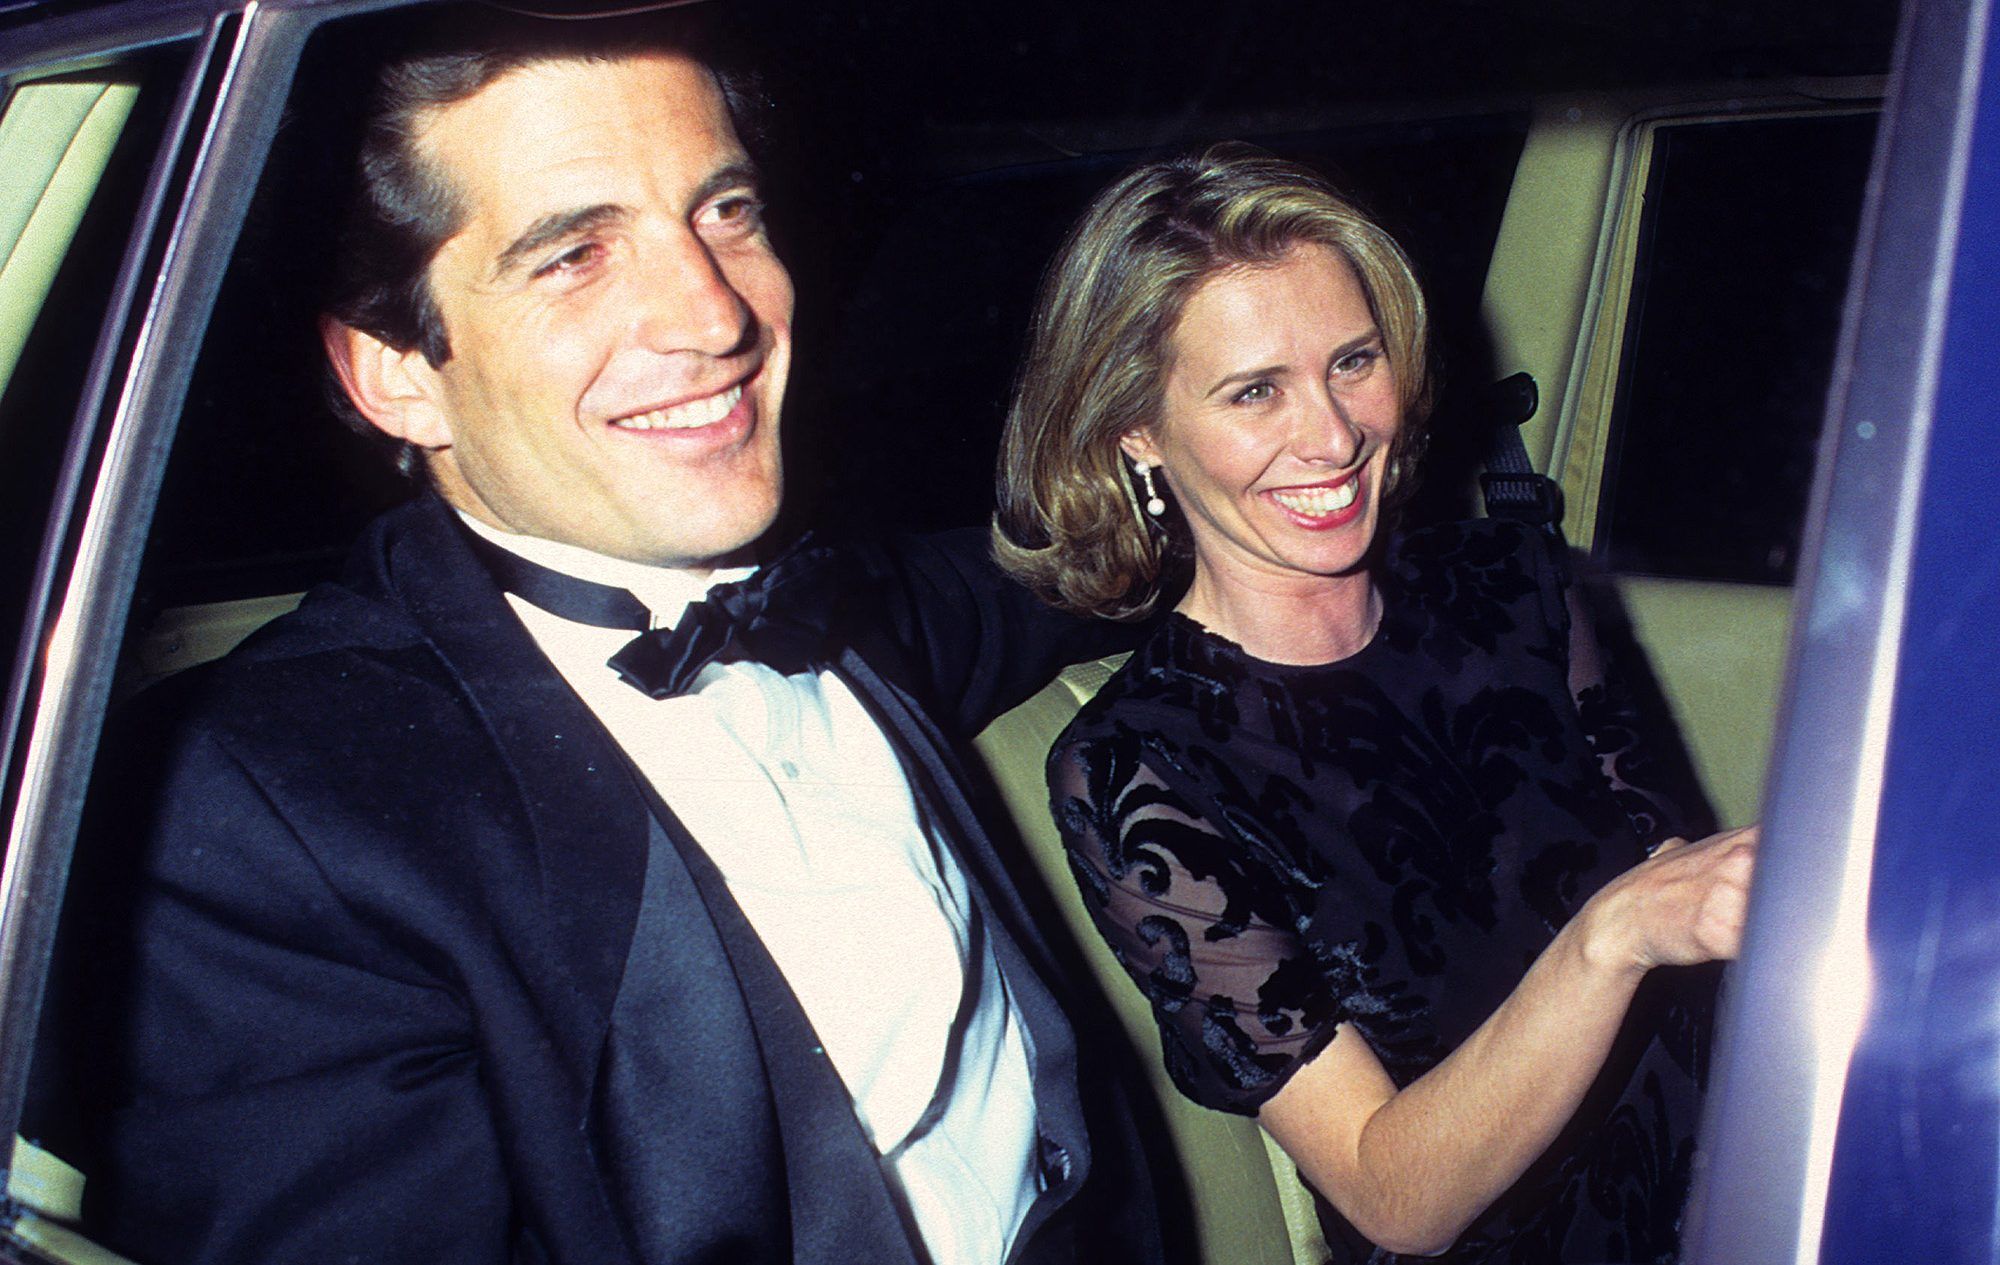 John Kennedy Jr. at American Ballet Theatre's Spring Gala Dedicated to the Late Jackie Onassis